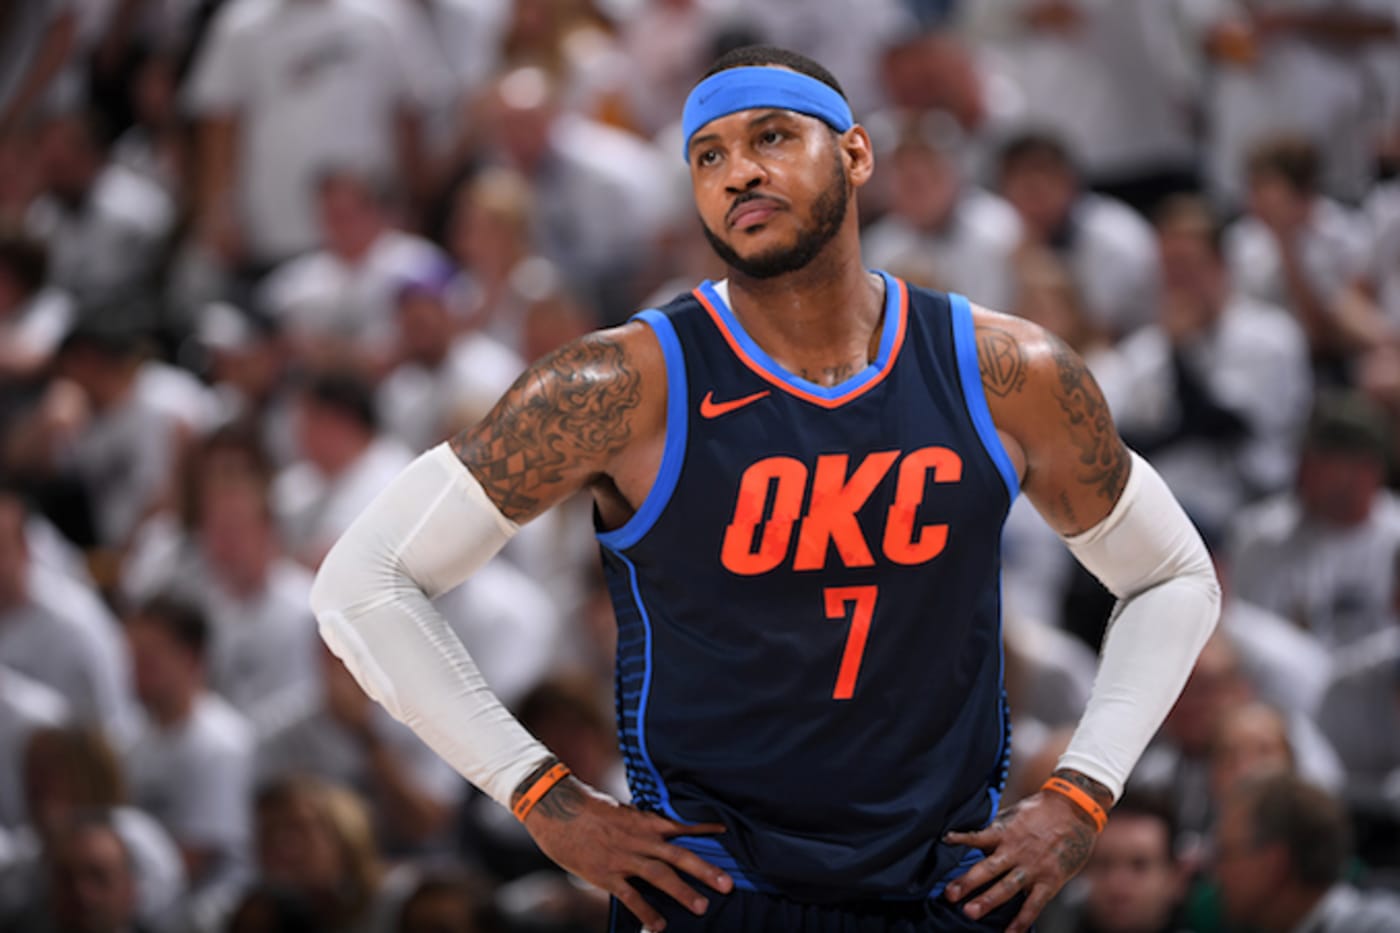 Carmelo Anthony of the Oklahoma City Thunder looks on during the game